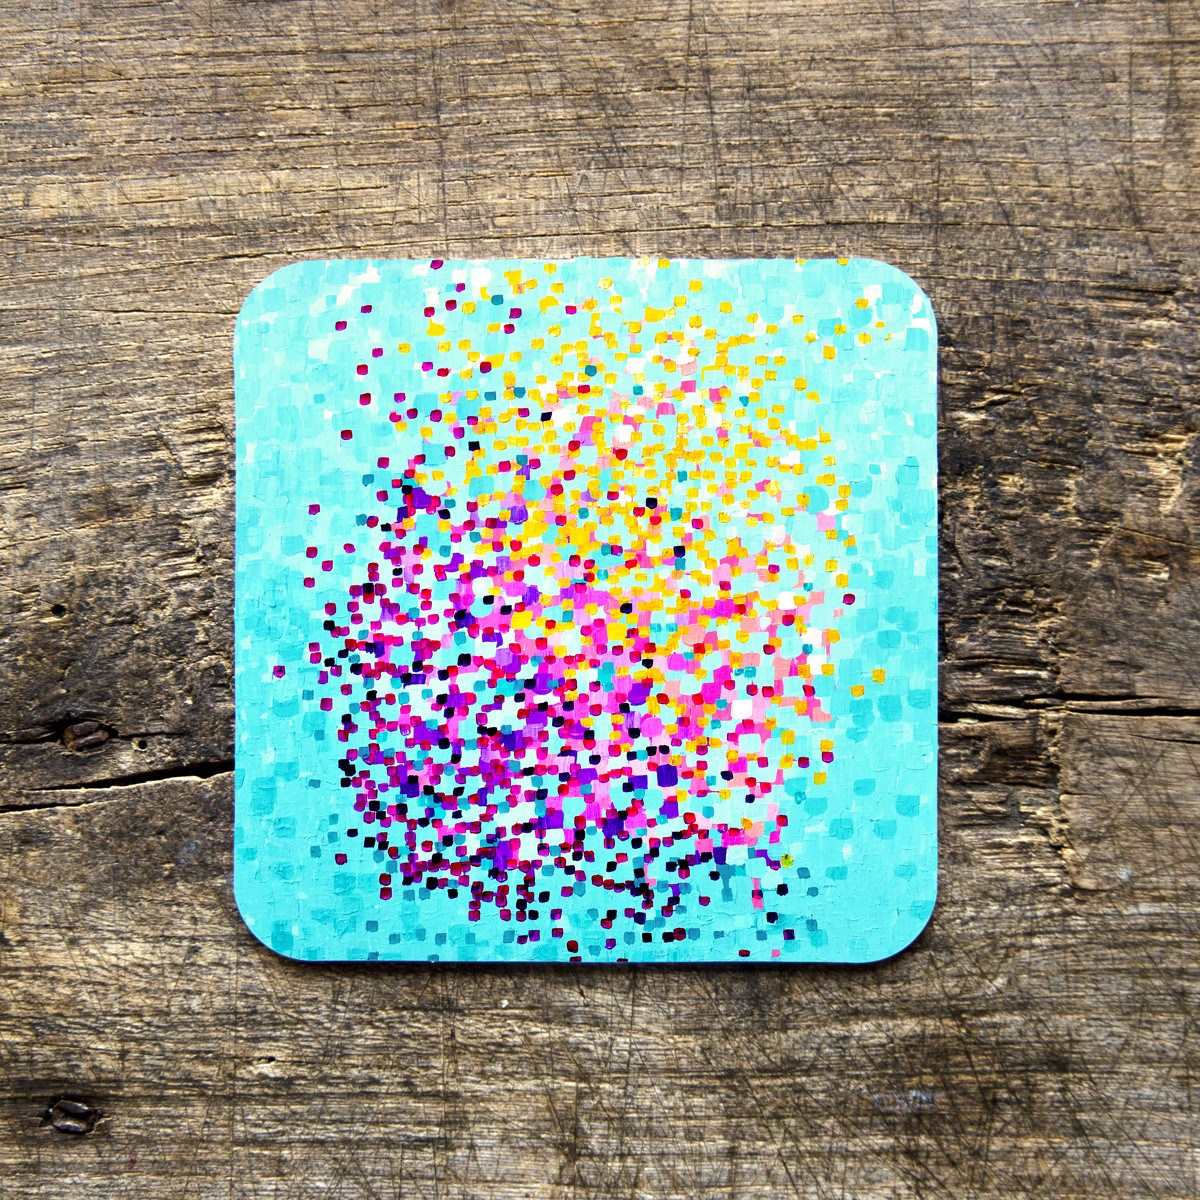 'Summertime' Coasters - Louise Mead